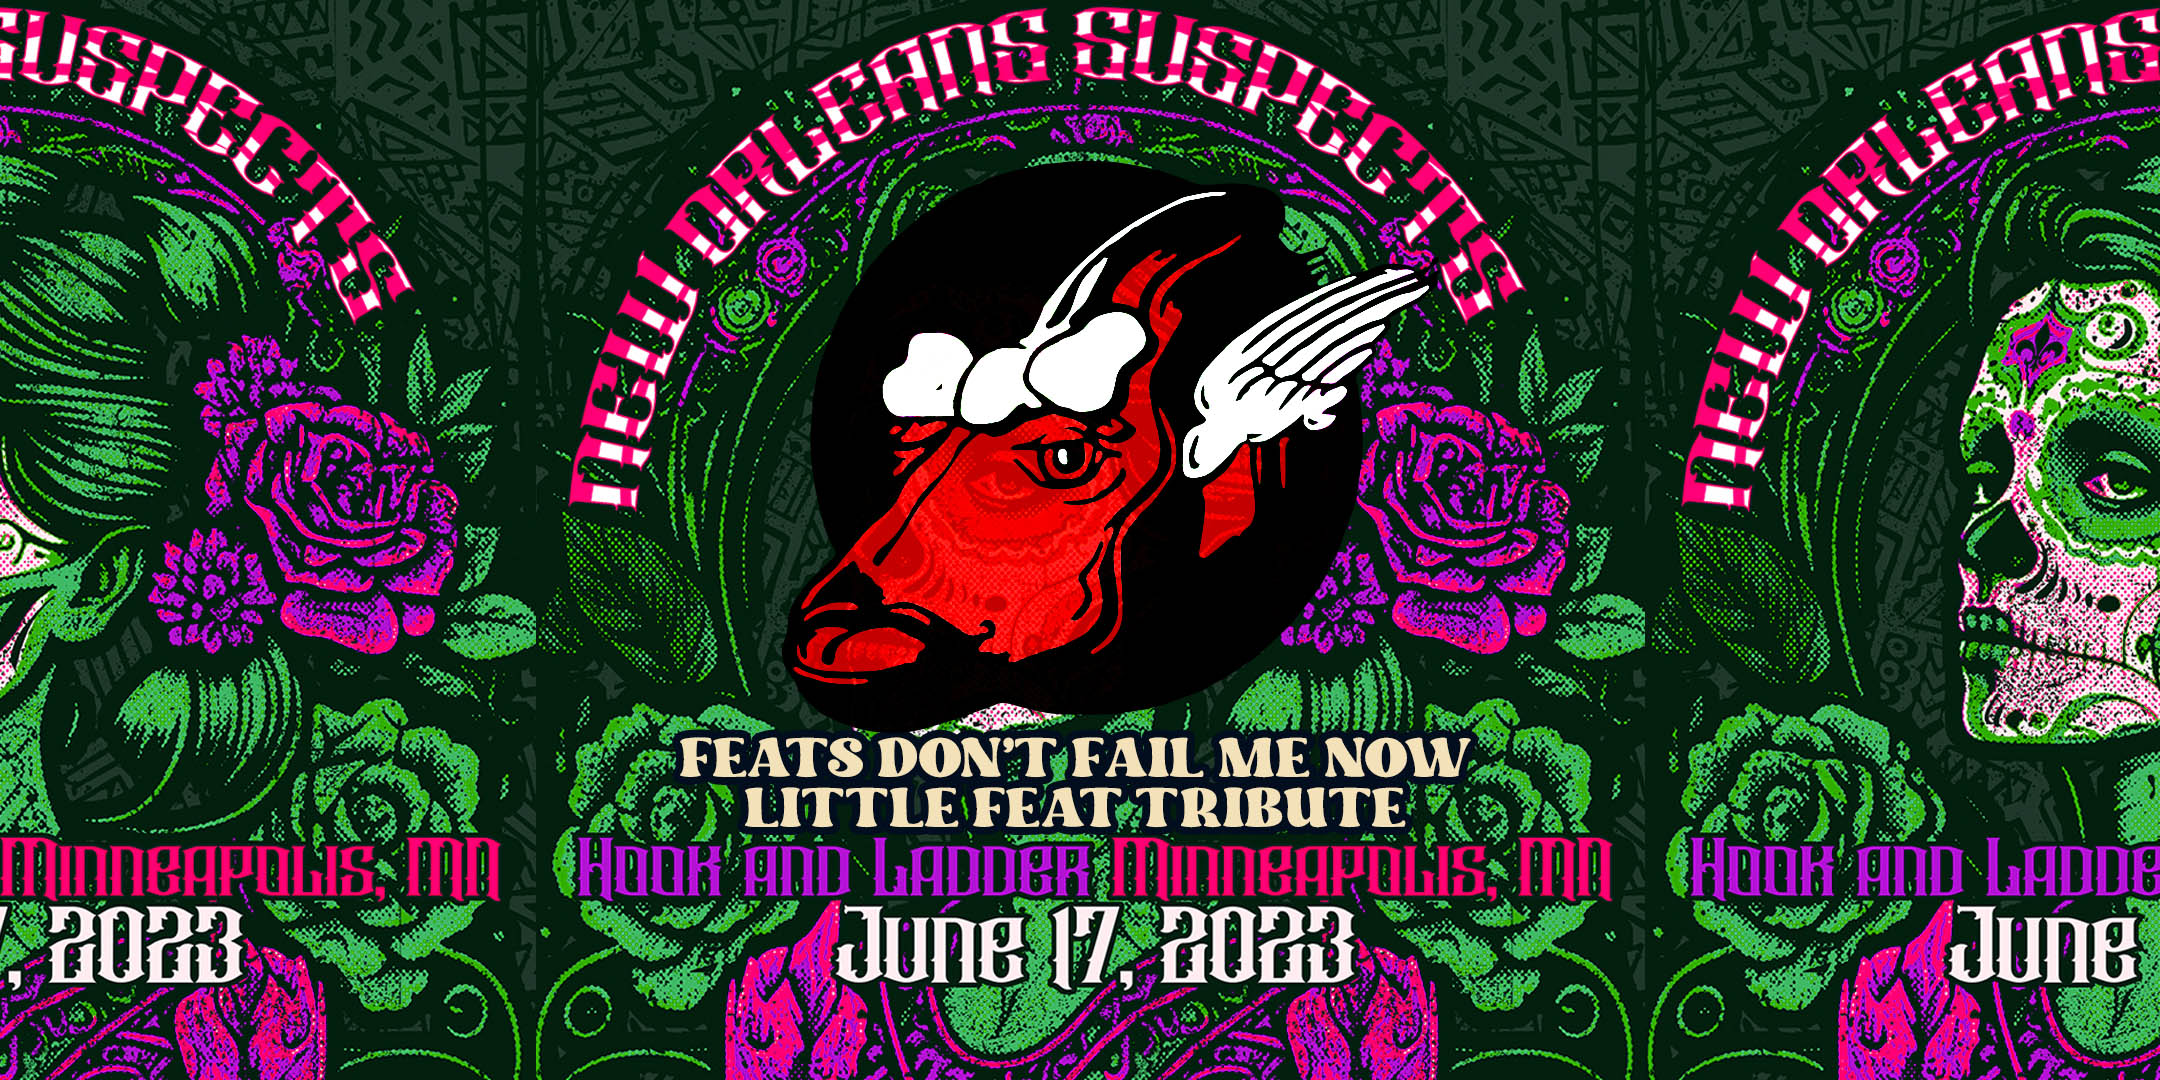 Krewe of DADs presents New Orleans Suspects “Feats Don’t Fail Me Now” A Tribute To Little Feat Saturday, June 17 Hook After Dark The Hook and Ladder Theater Doors 10:00pm :: Music 10:30pm :: 21+ GA: $20 ADV / $25 DOS